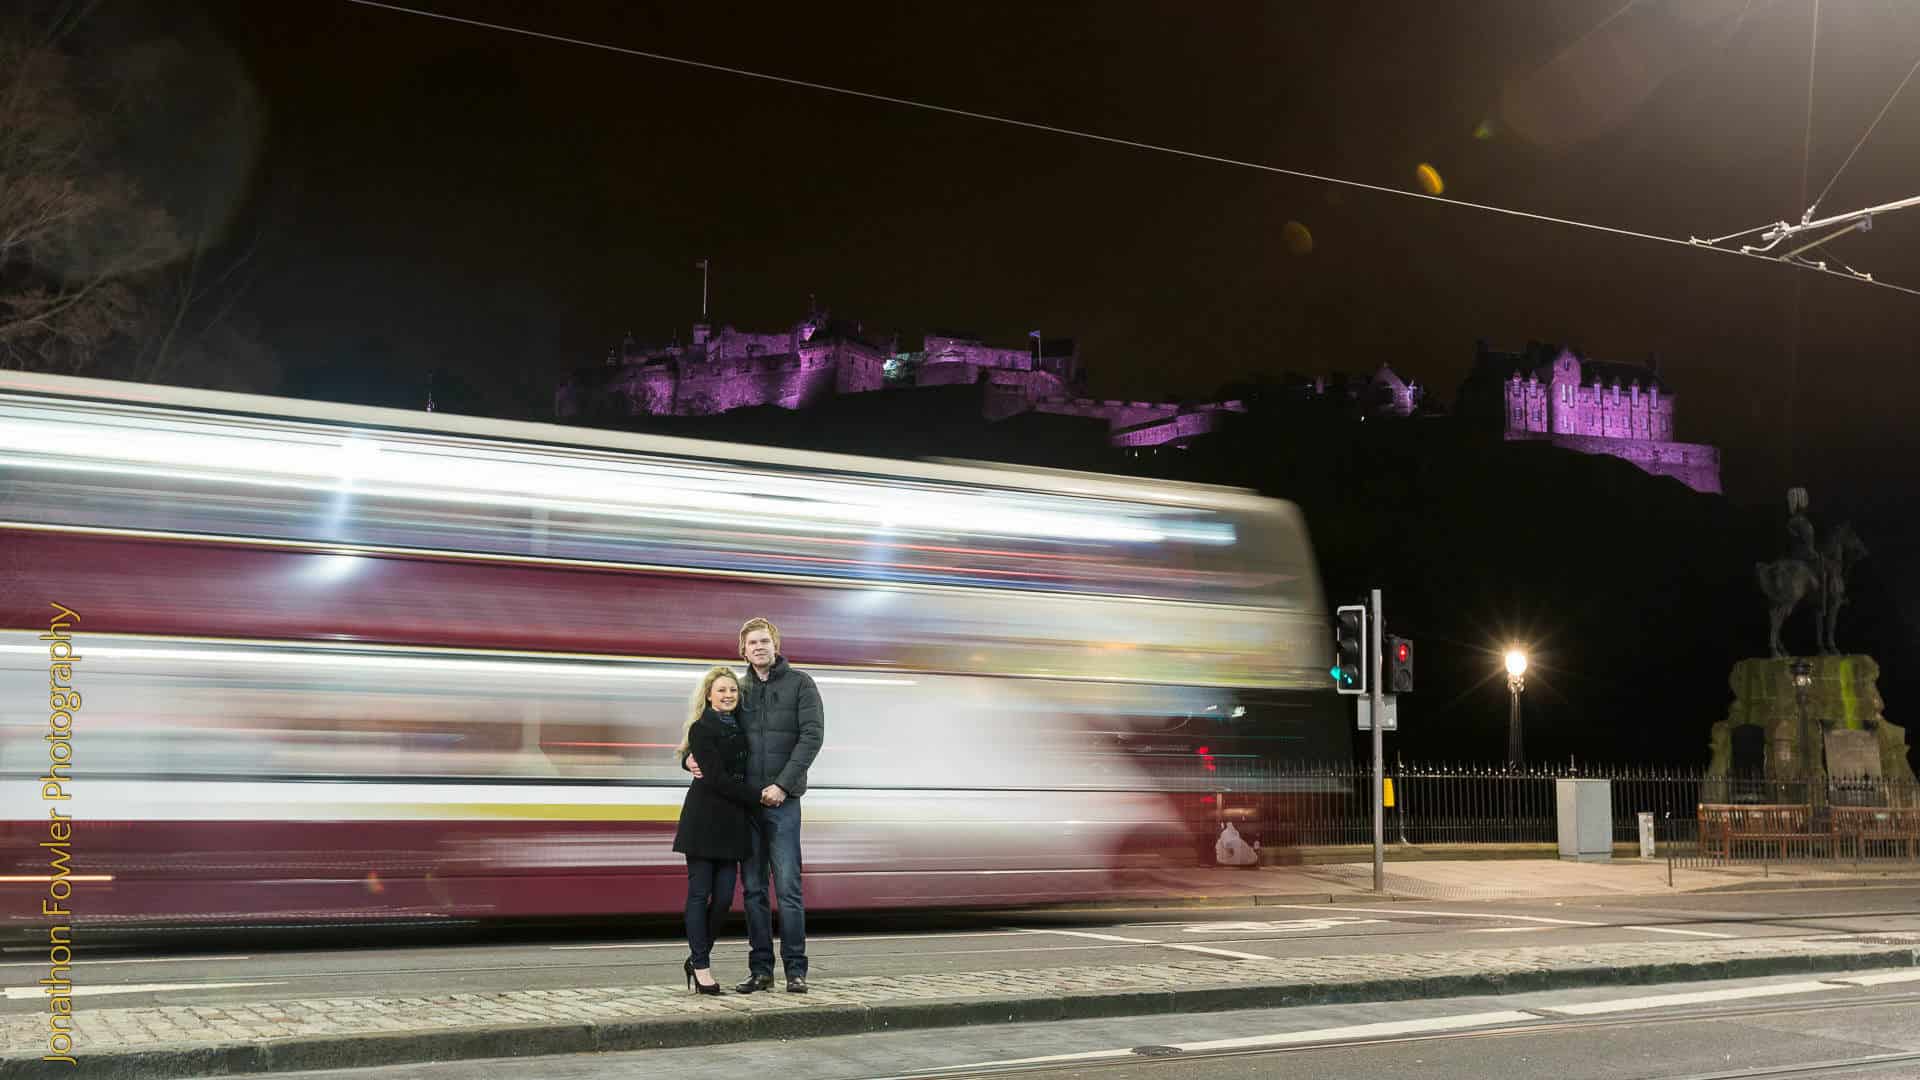 Edinburgh city centre night-time pre-wedding photoshoot Andrew and Nicola: A couple stands on a sidewalk at night with a blurred double-decker bus passing by. In the background, a castle is illuminated in purple light.